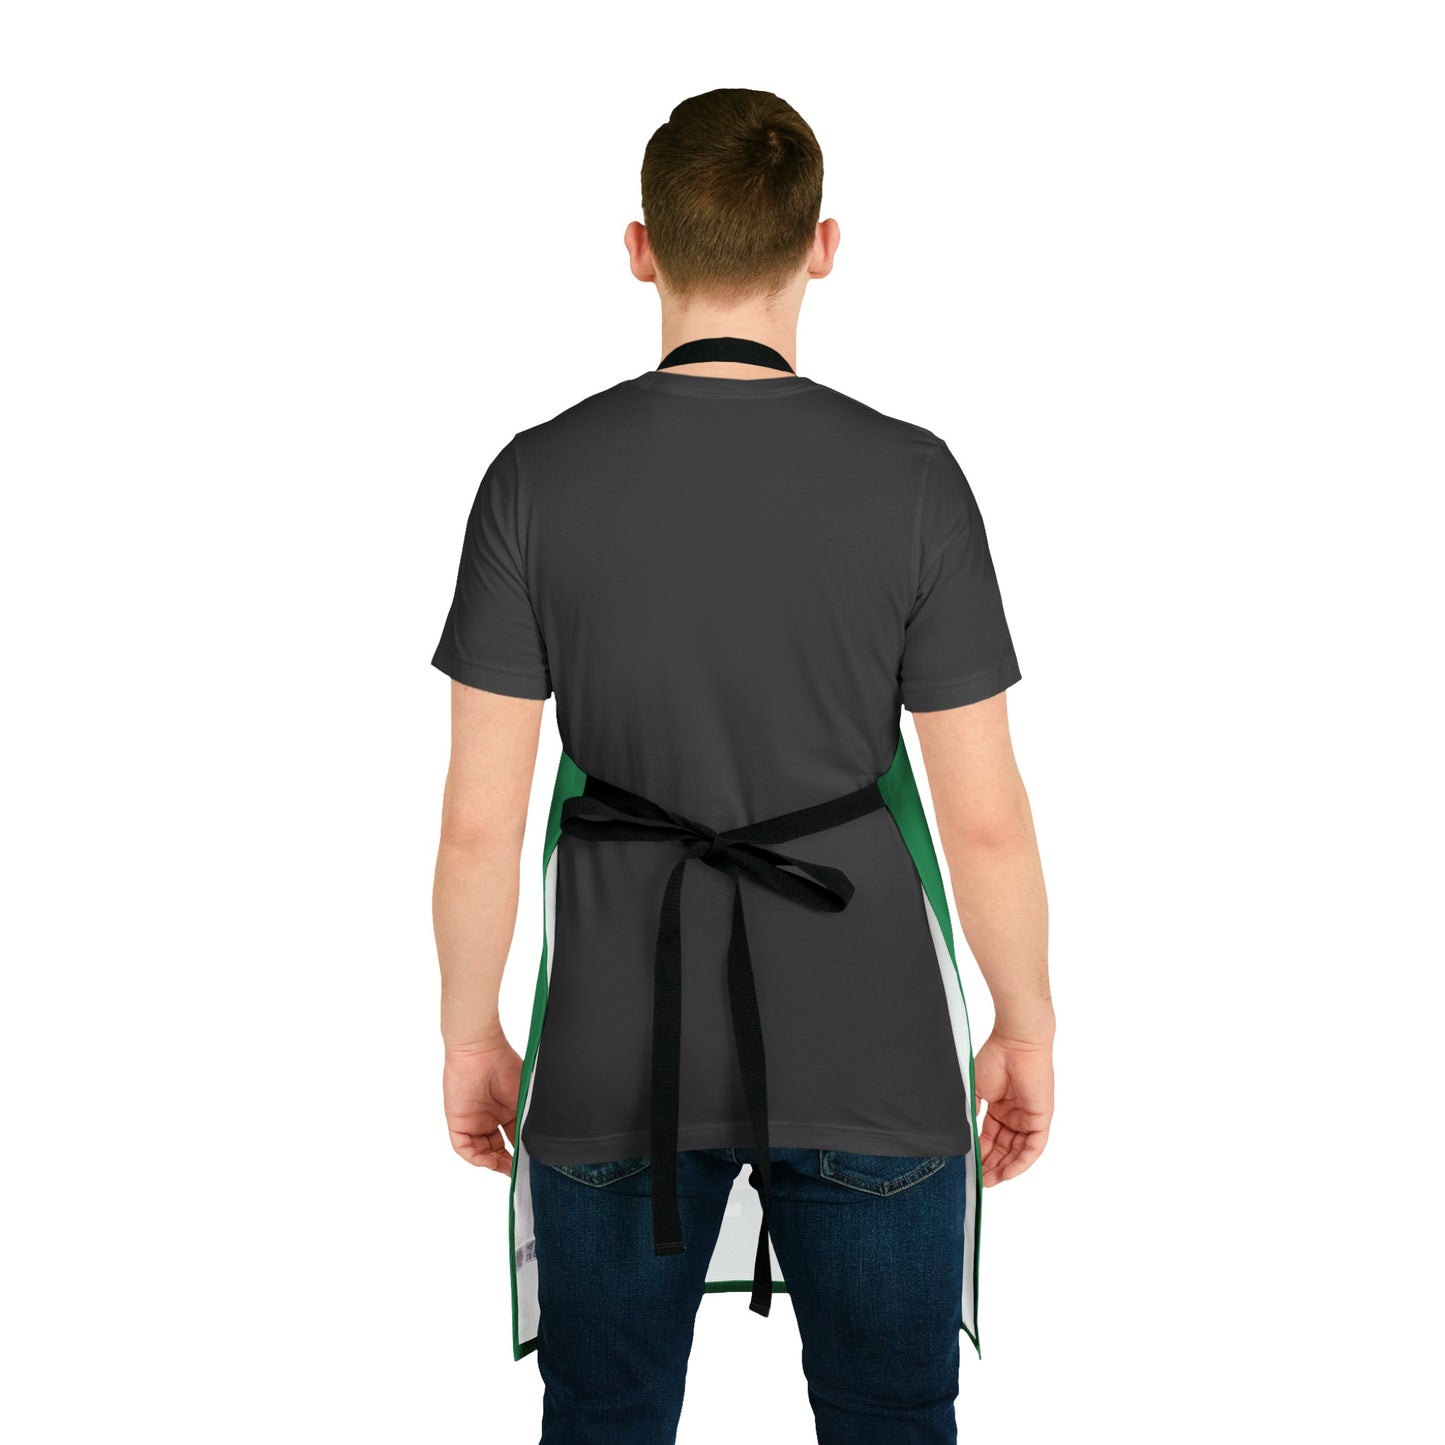 The Stamina for Men Hookers and Blow BBQ apron rear shot as worn by a man showing the tied black strap